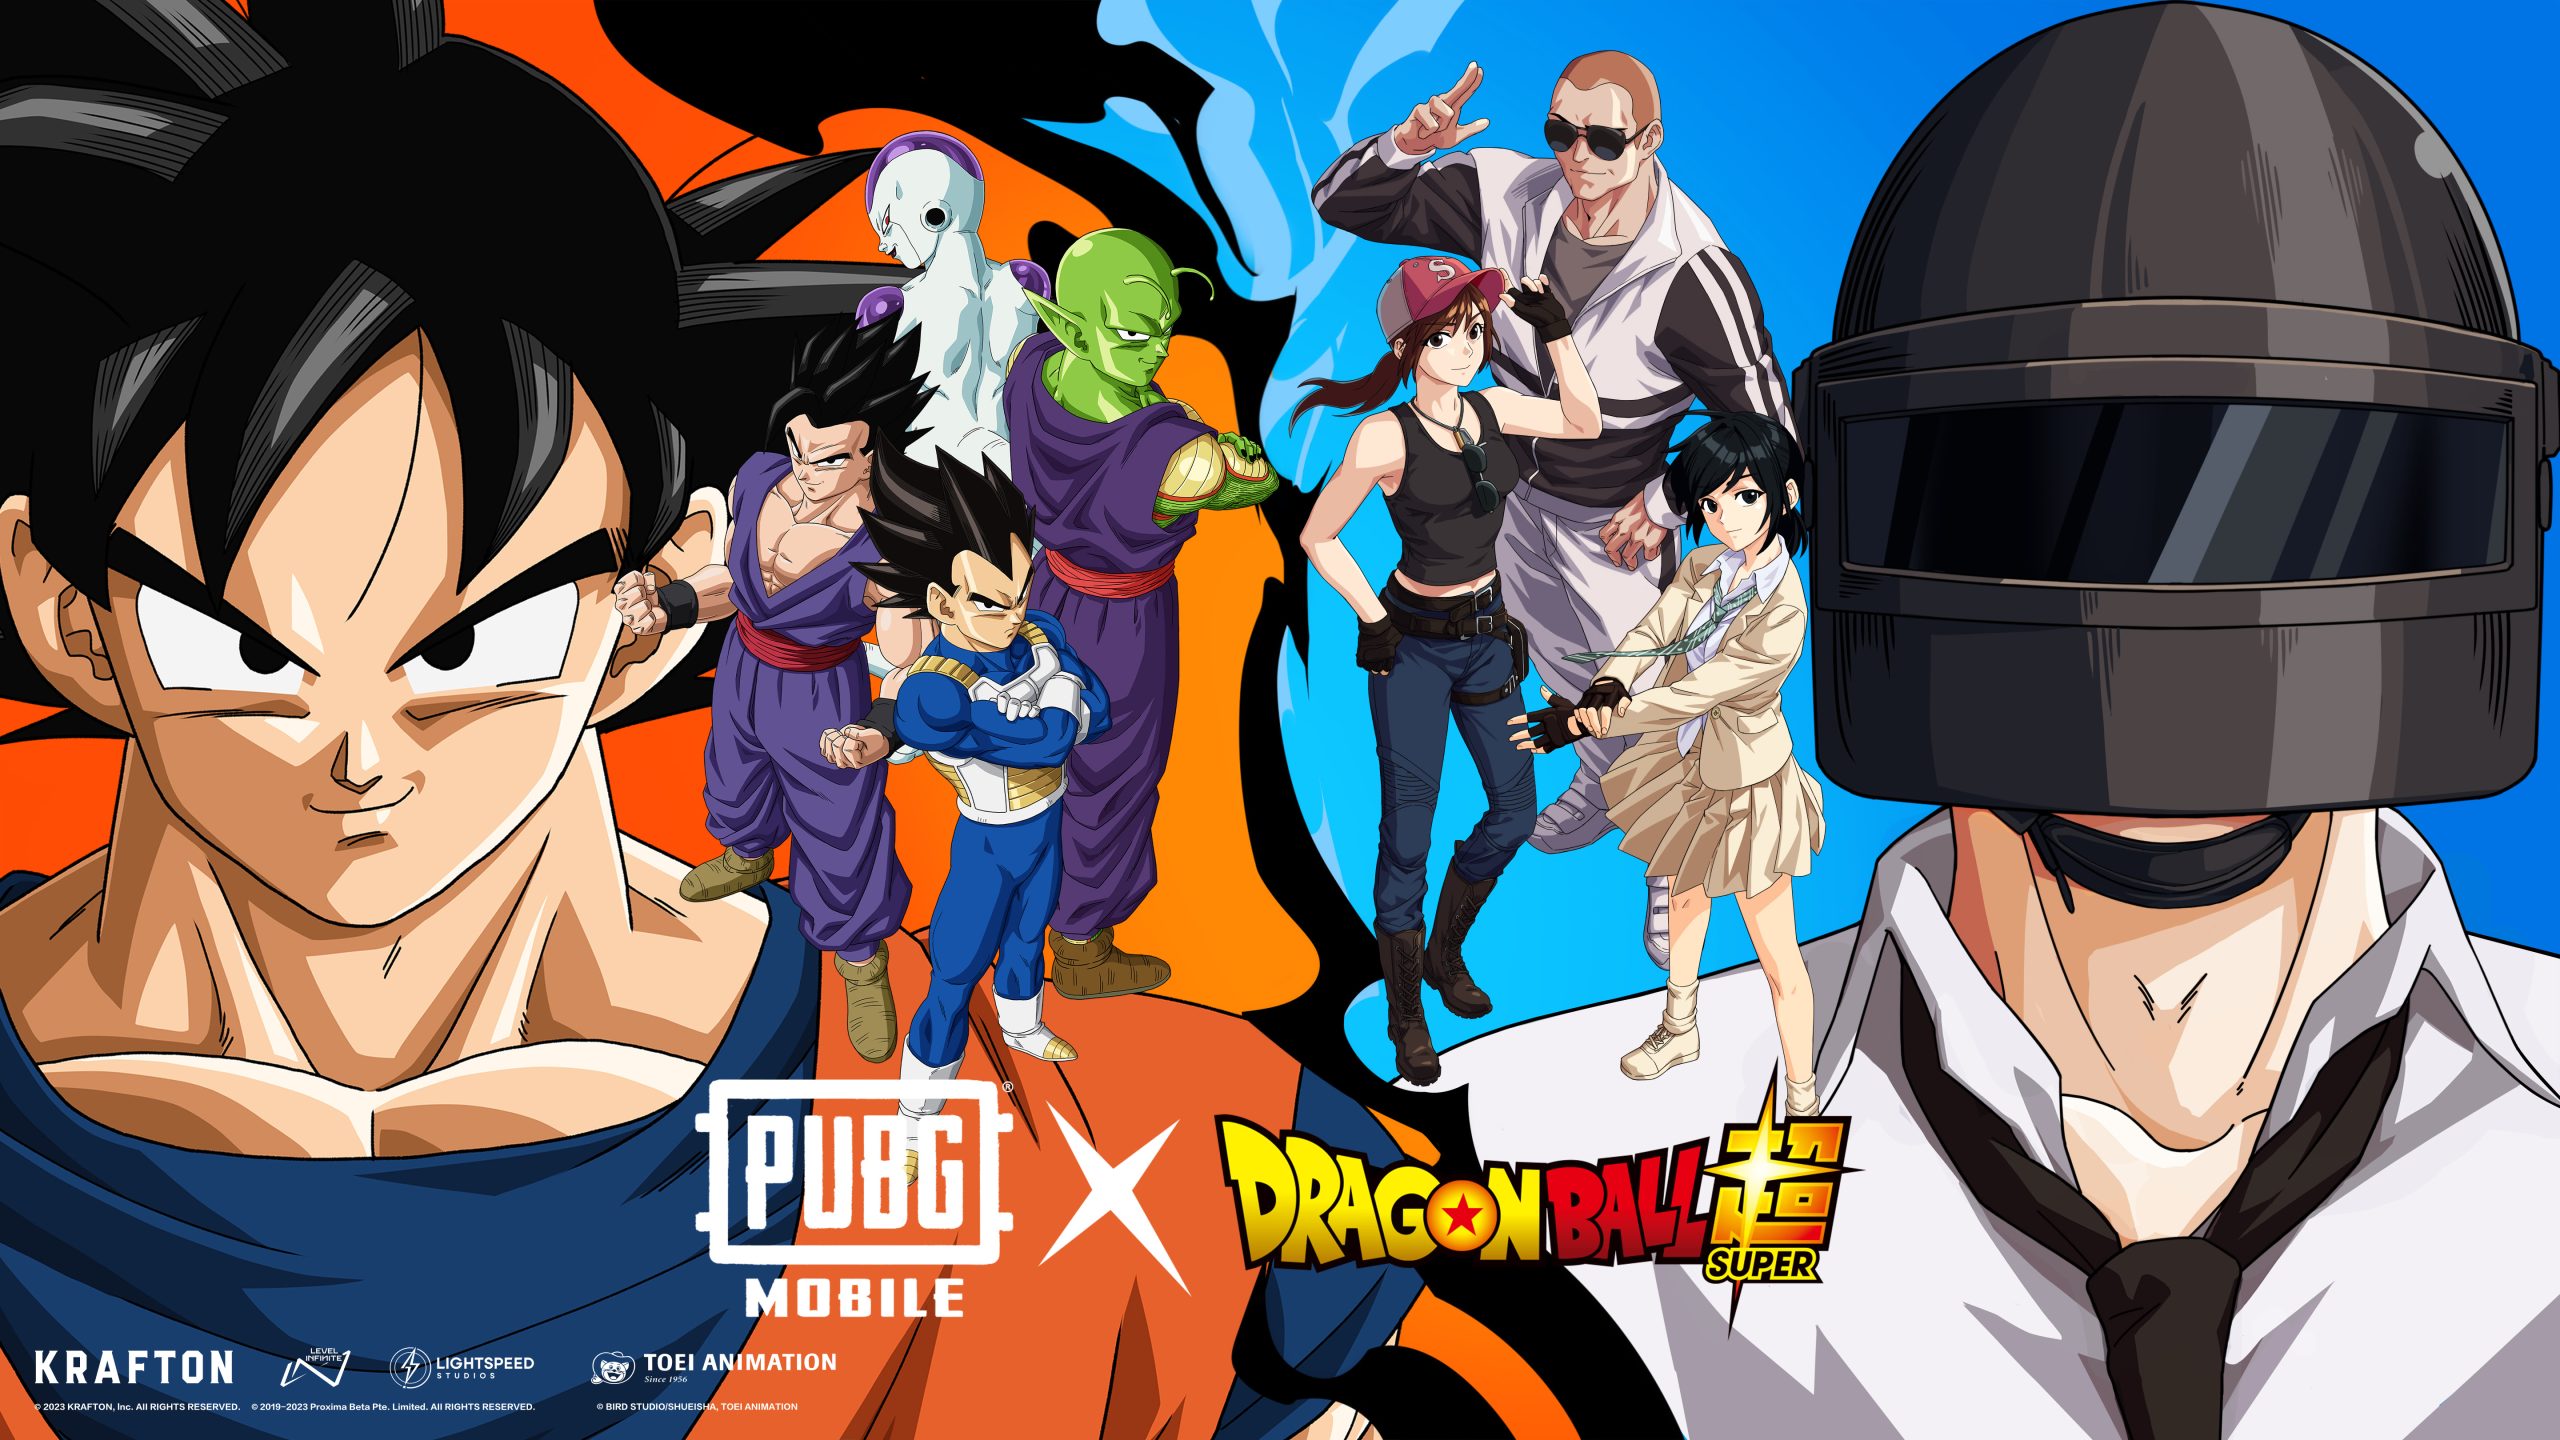 PUBG Mobile Announces Dragon Ball Super Collab Featuring New Game Modes, Areas & Playable Characters